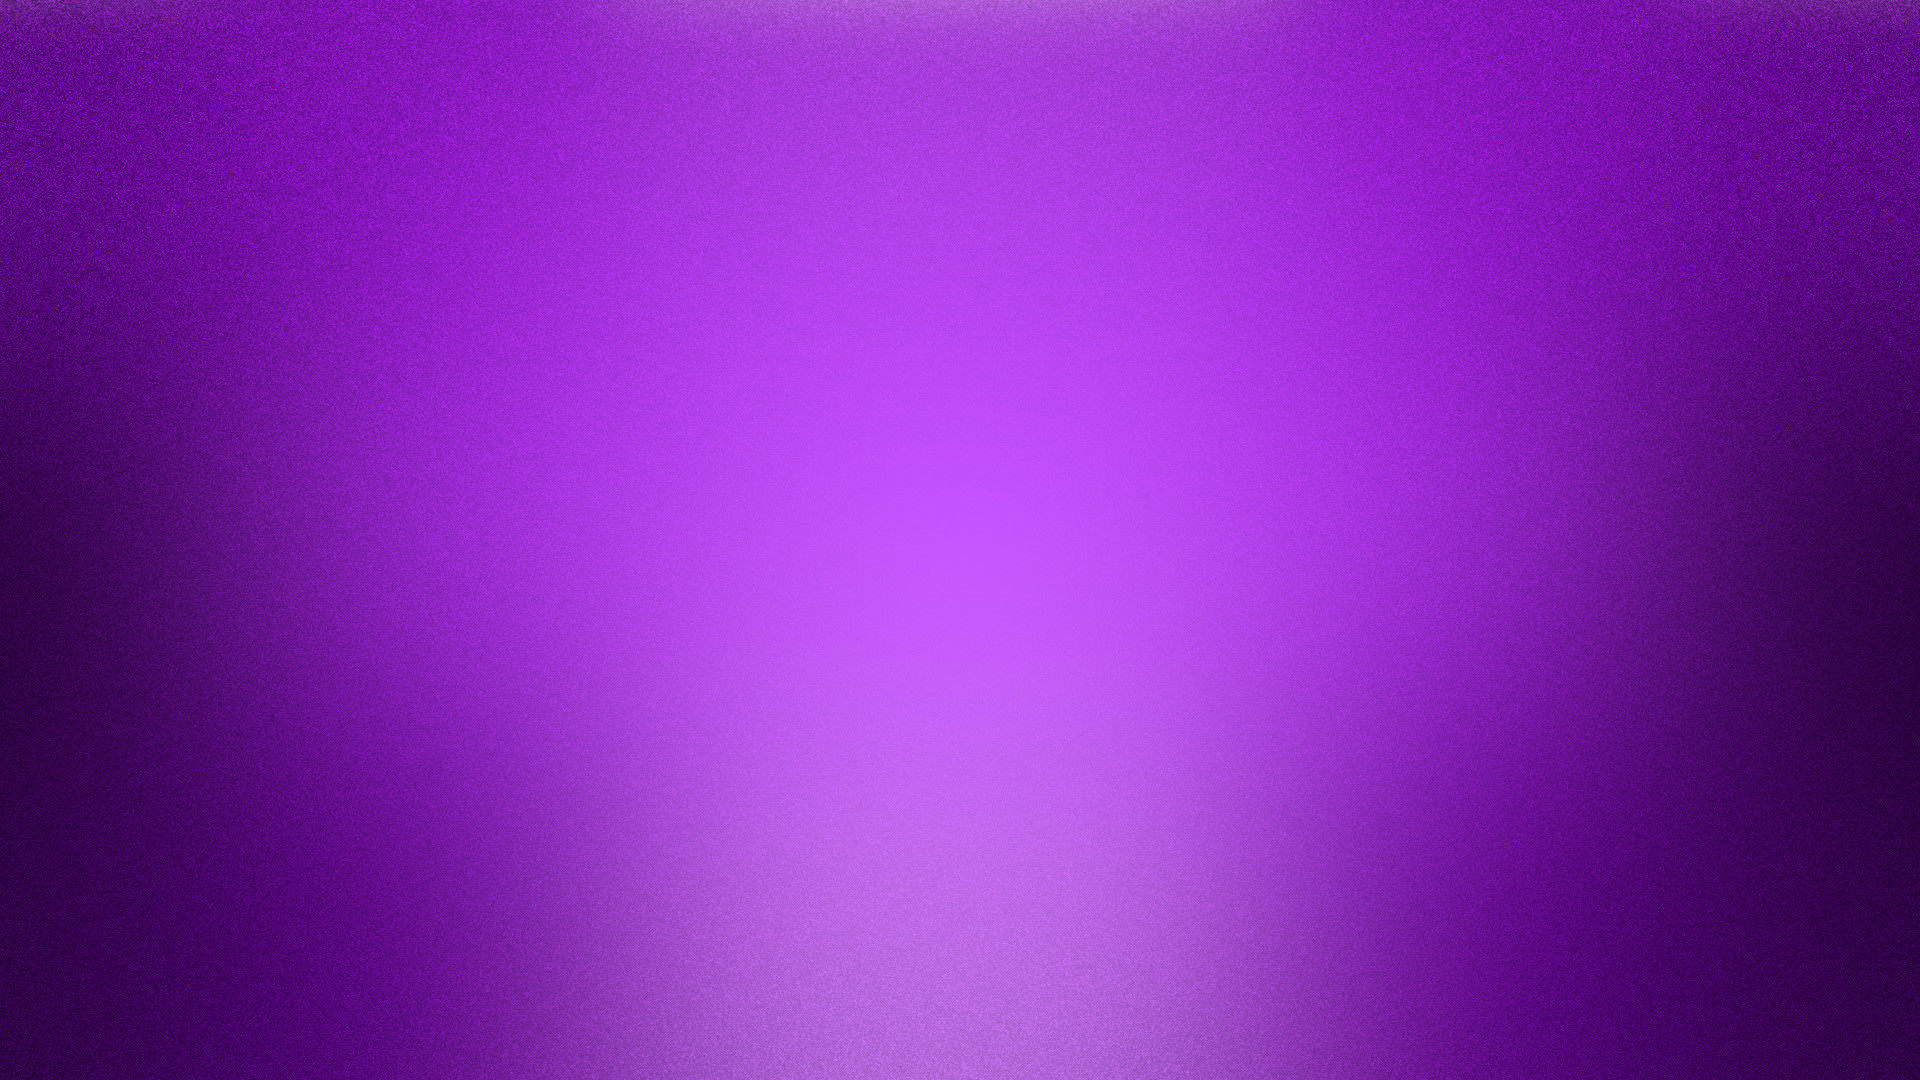 HD purple wallpaper image to use as background